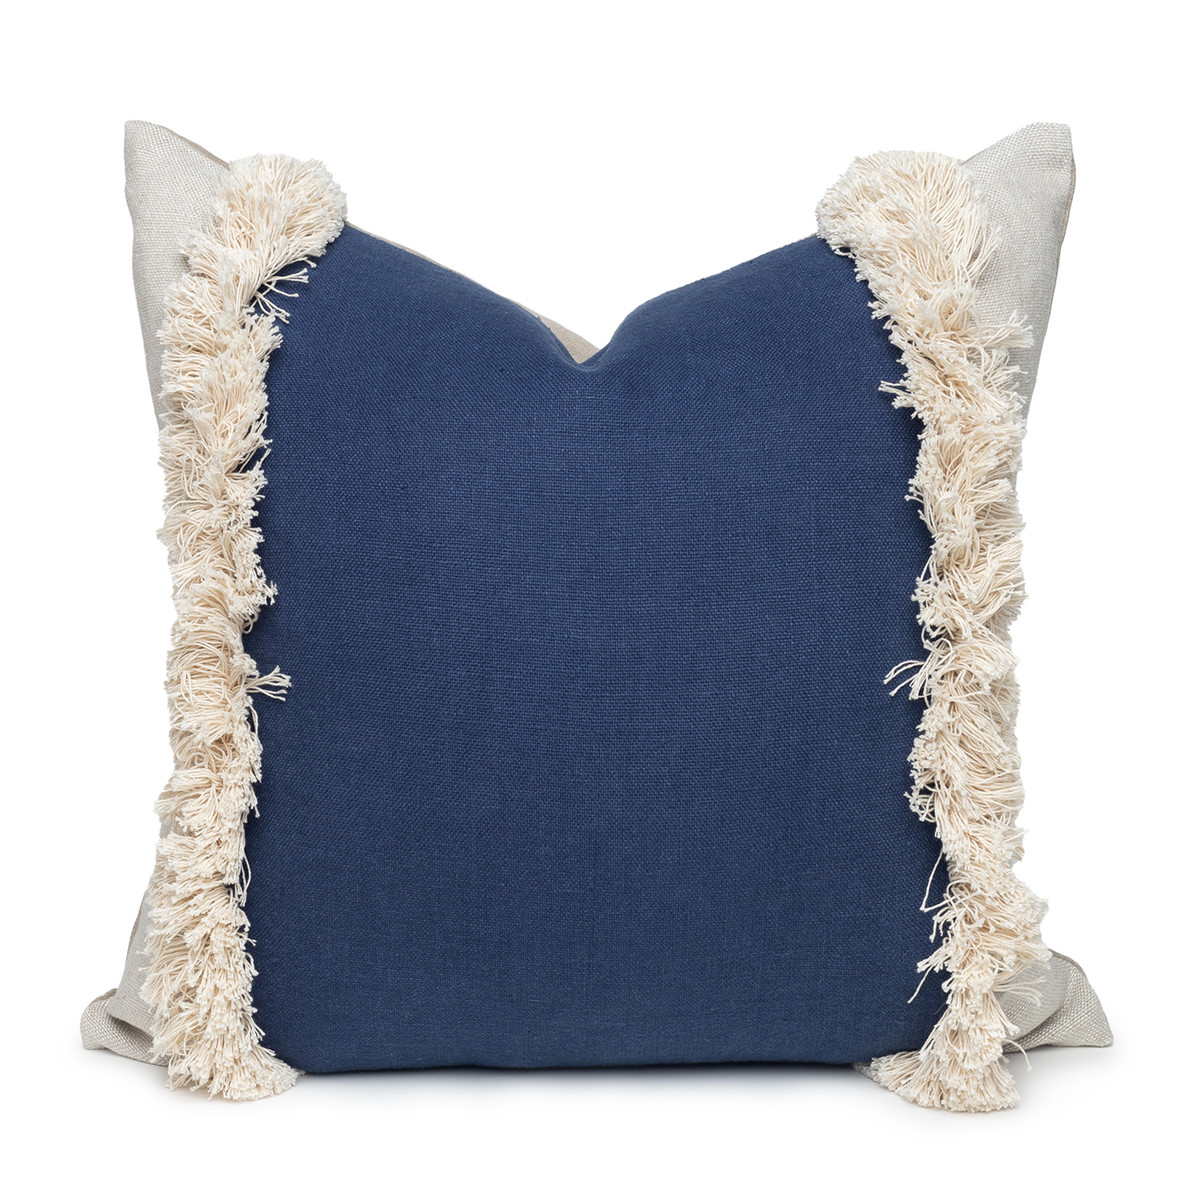 Muse PURE LINEN fringe Pillow 22 x 22 Navy- Front